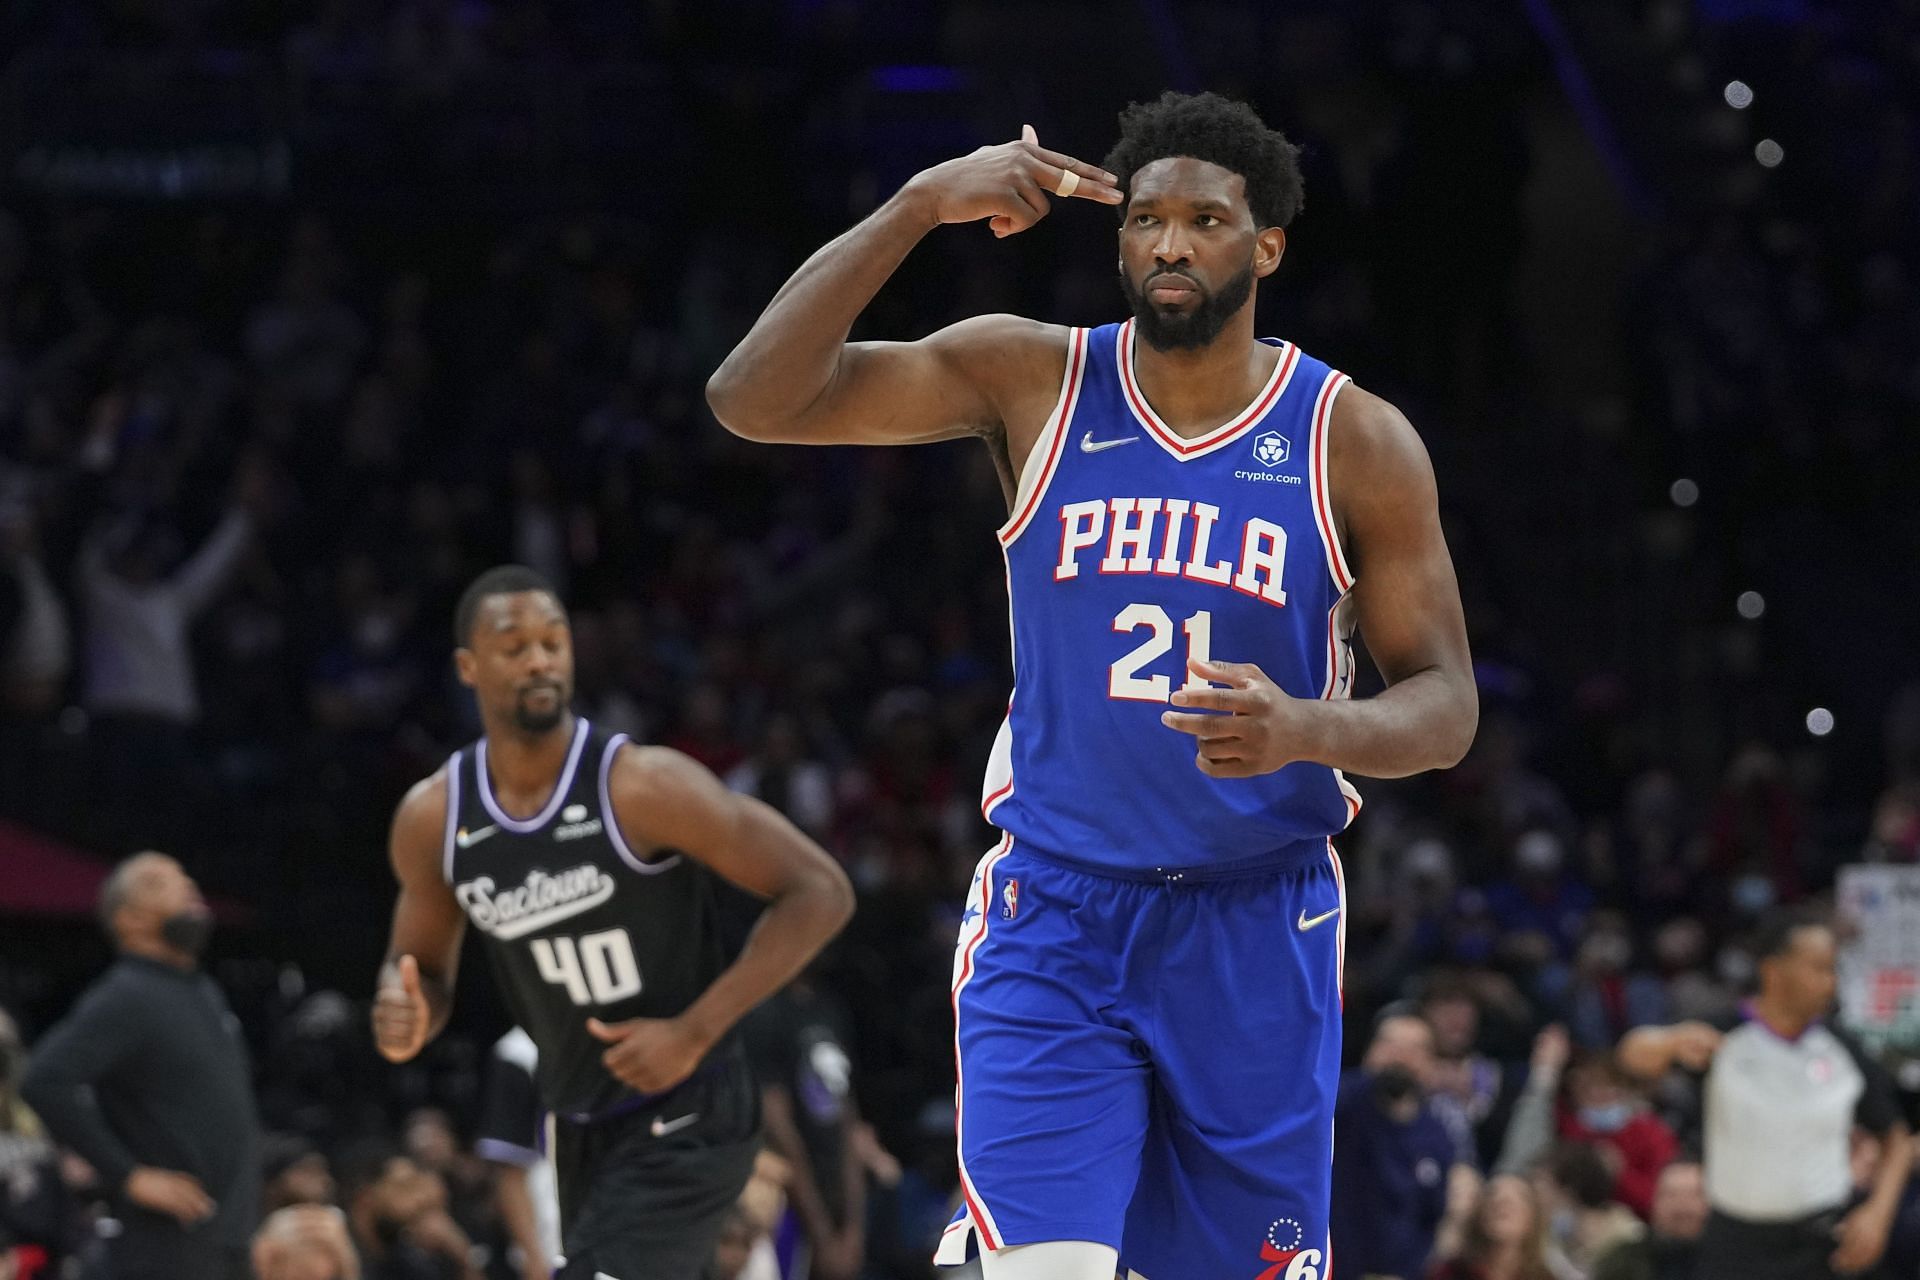 “That meme might bite his a** right back if he gets put out before Ben Simmons” – Gilbert Arenas on Joel Embiid’s Twitter post following trade, says 76ers will not make it past second round